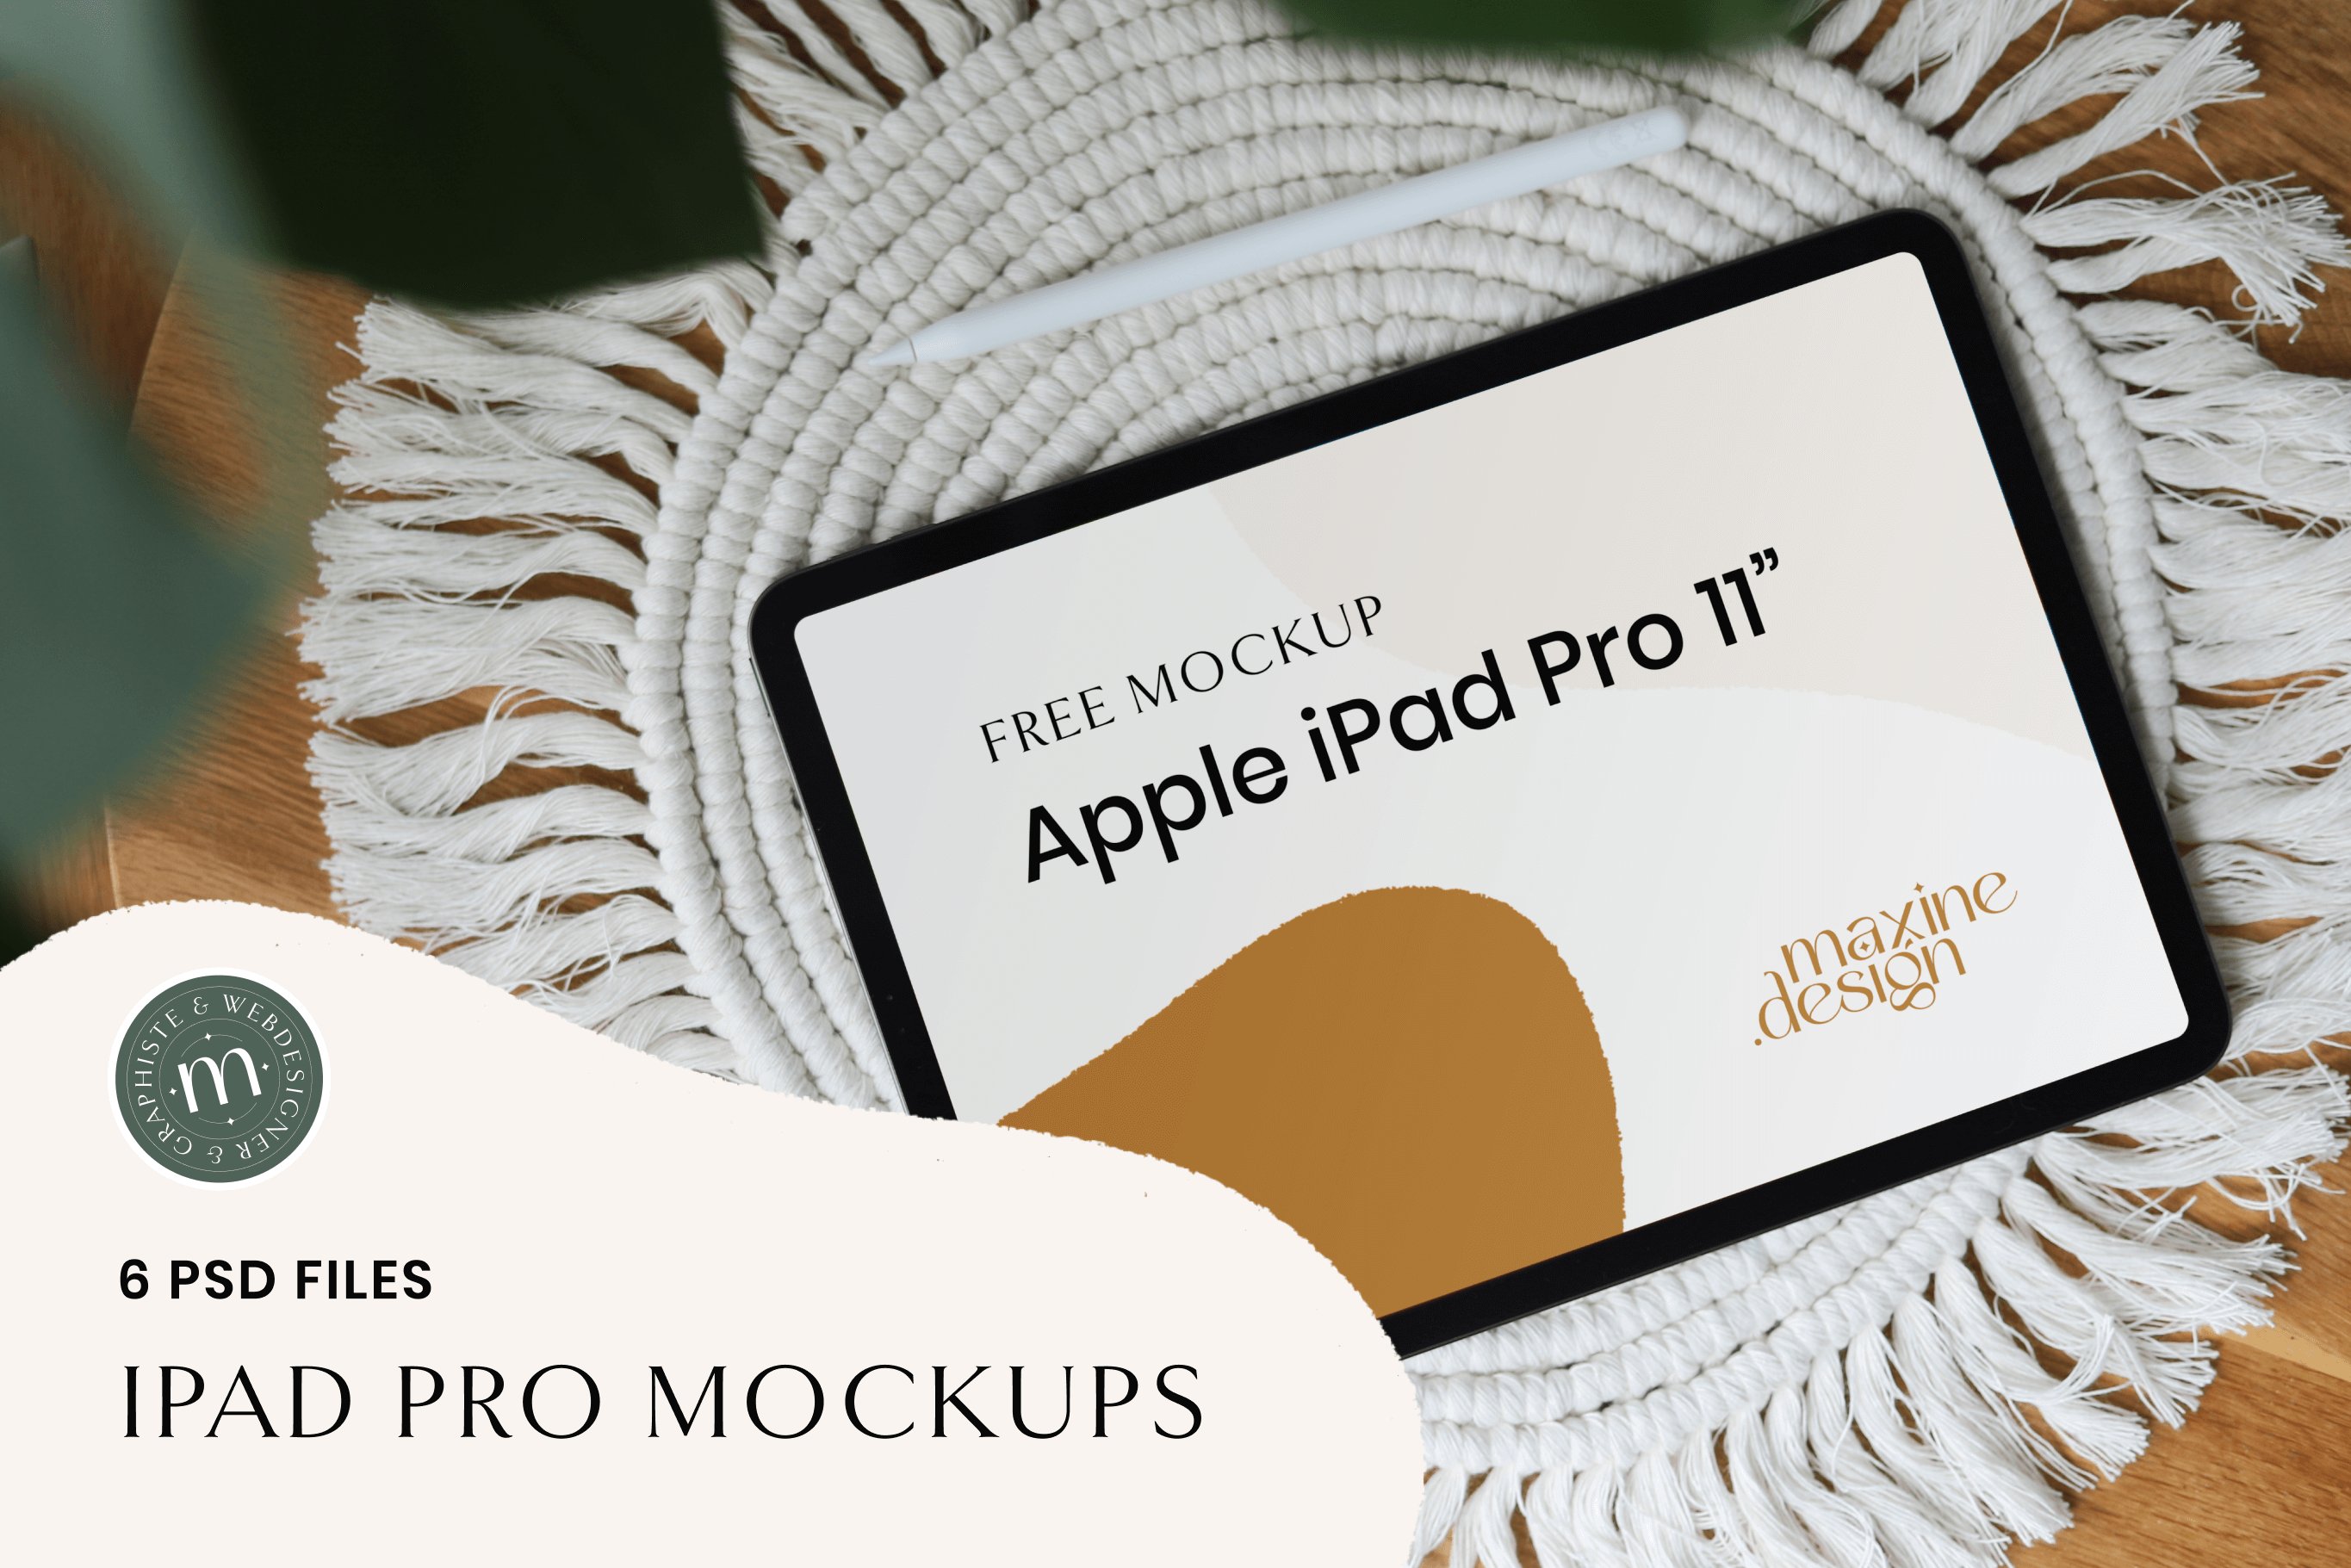 iPad Pro 11" Mockup Collection cover image.